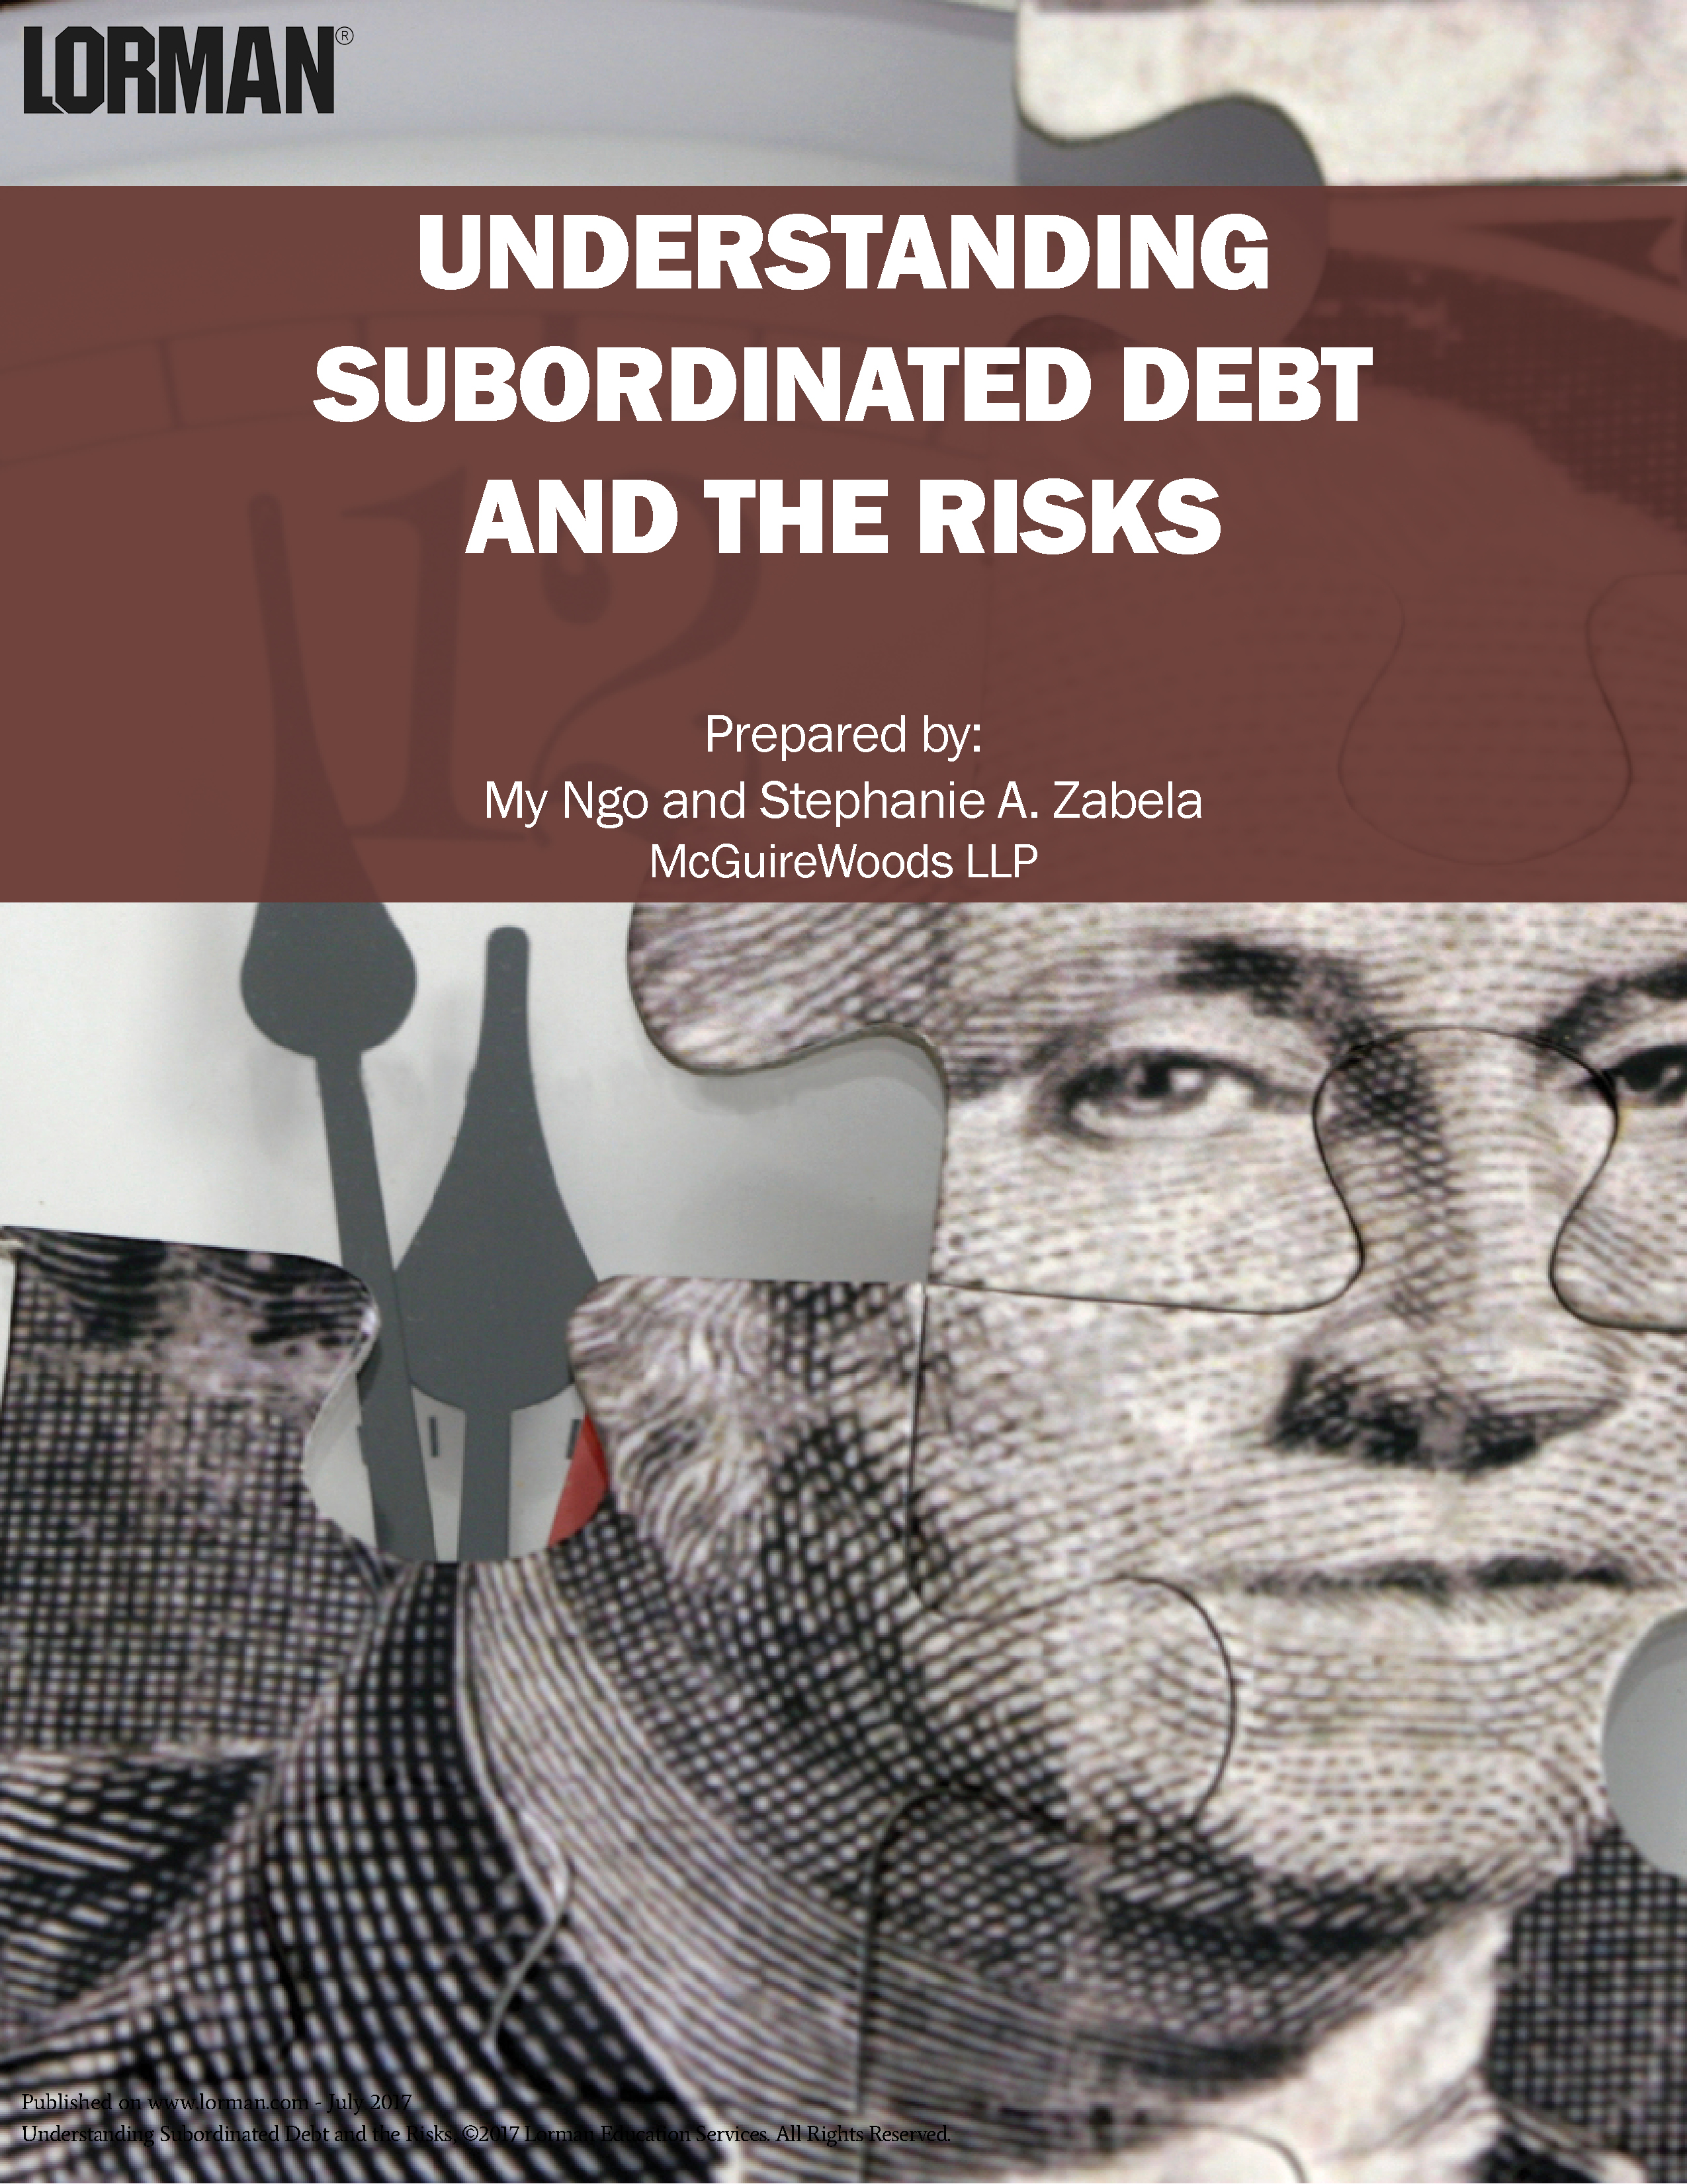 Subordinated Debt: What It Is, How It Works, Risks